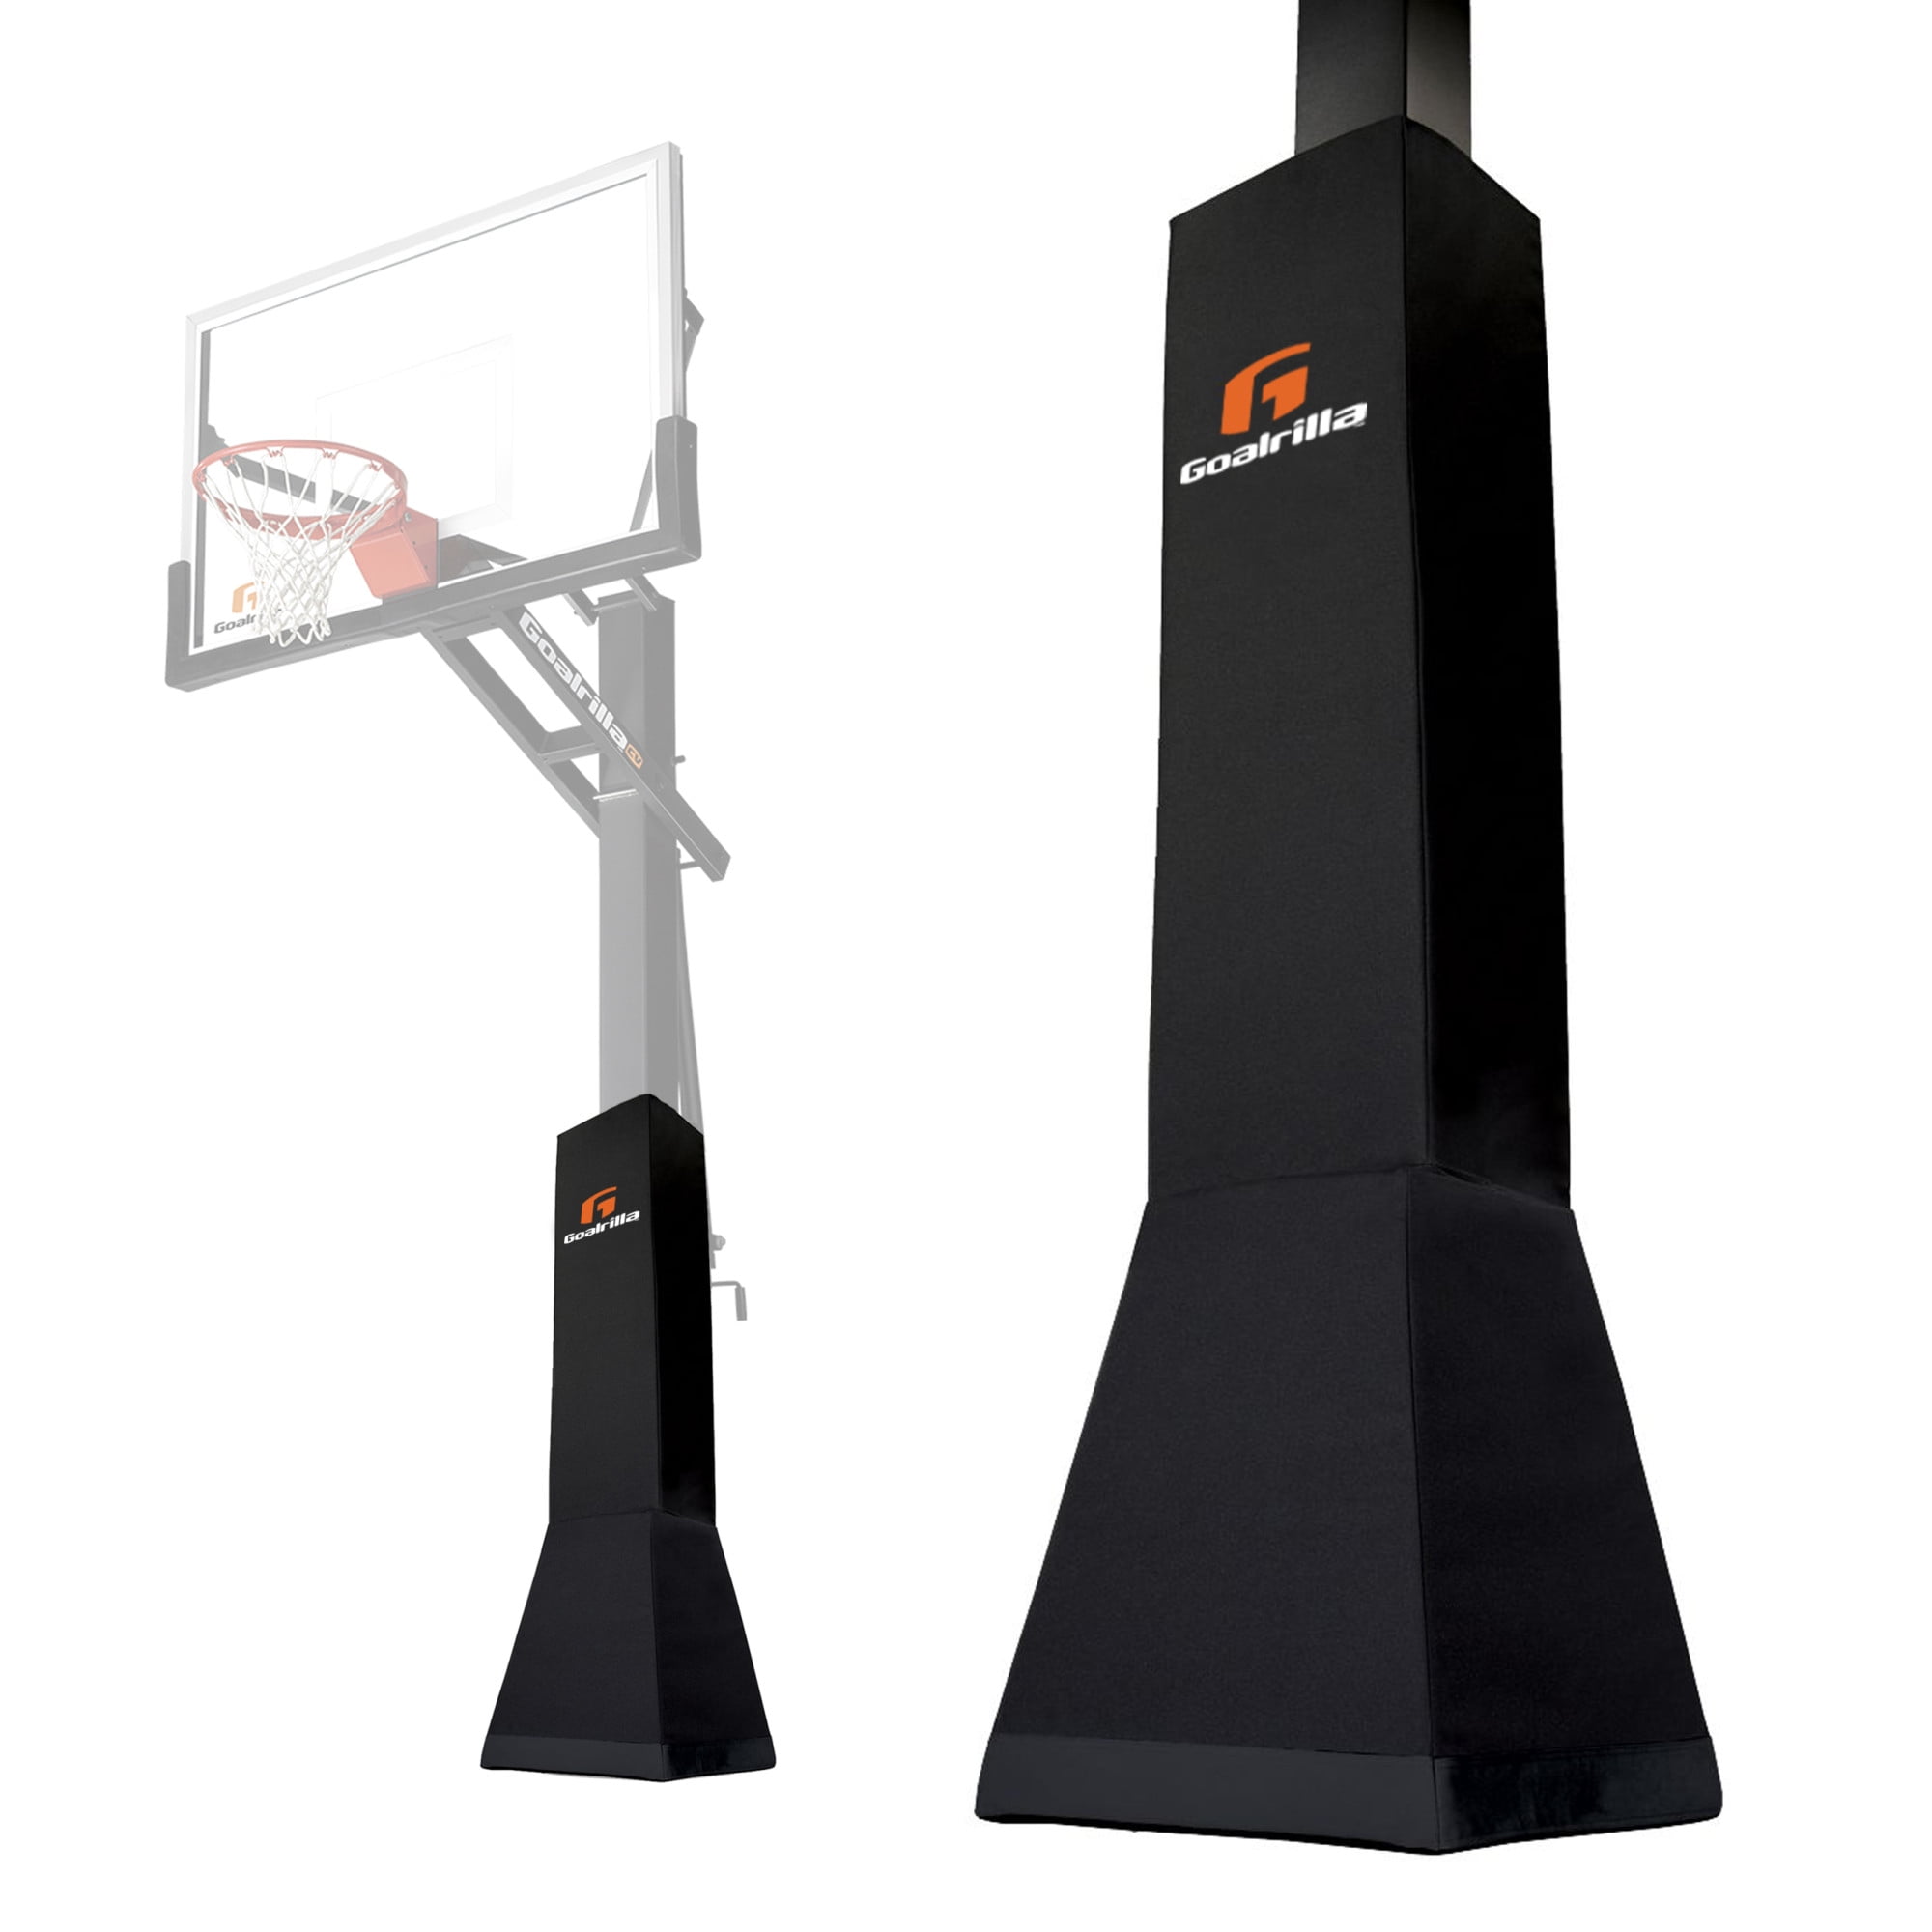 New Lifetime 0647 Mammoth Basketball Protection Cover Pole Pad Safety Padding 